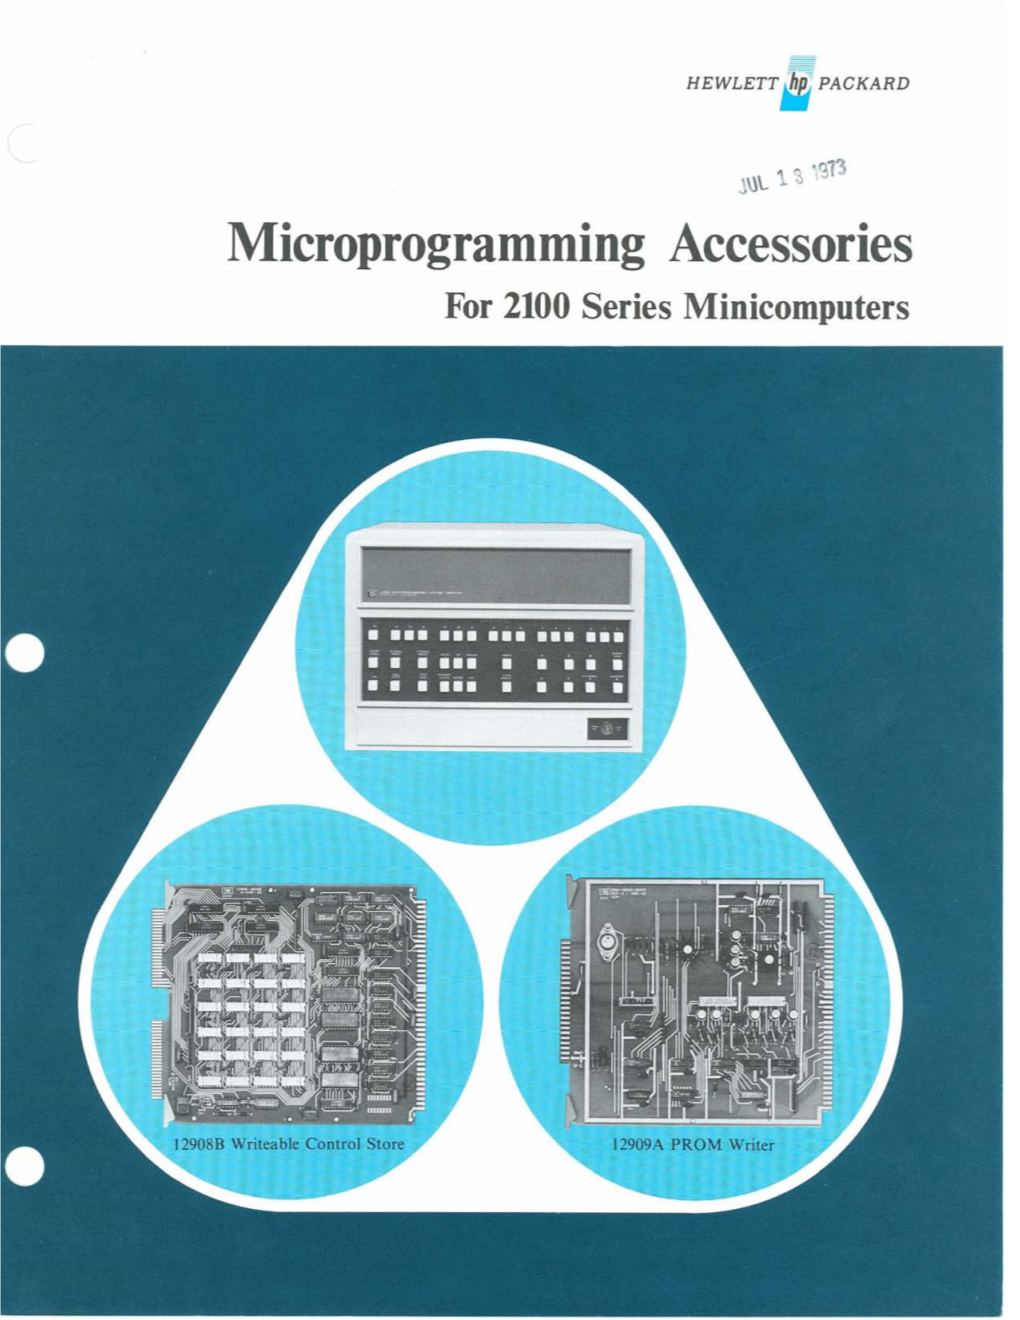 Microprogramming Accessories for 2100 Series Minicomputers, 1973